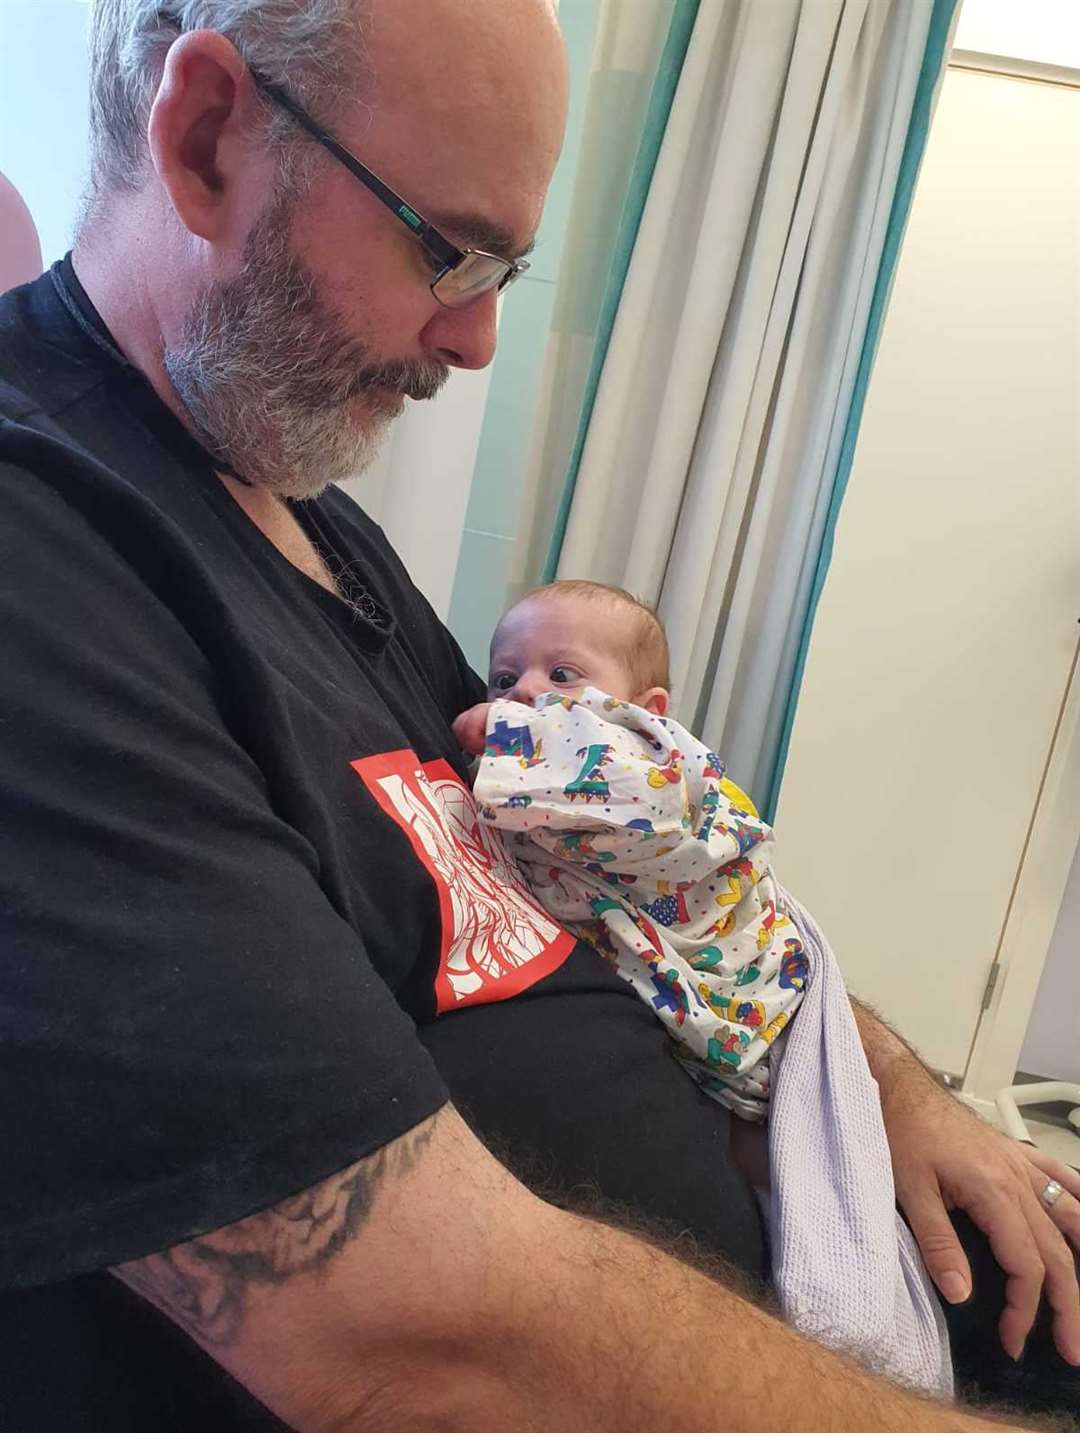 Baby Thomas pictured with his Dad in hospital while waiting for treatment to his eye cancer